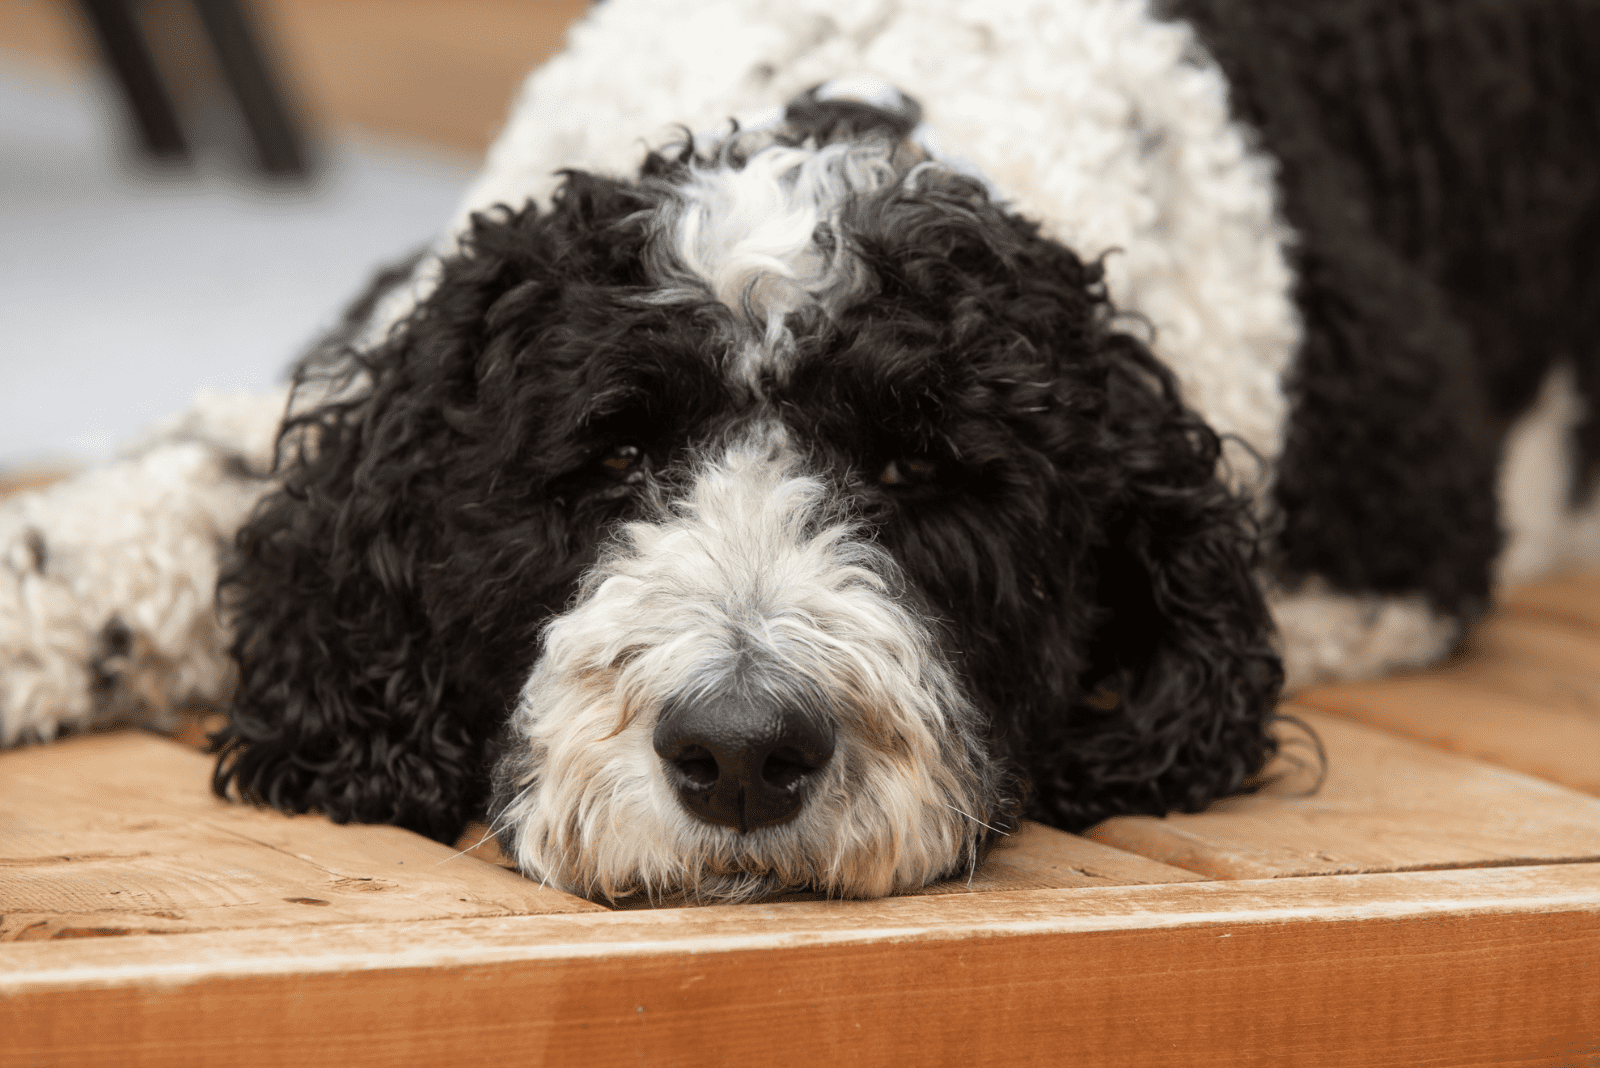 Sheepadoodle is lying down and resting